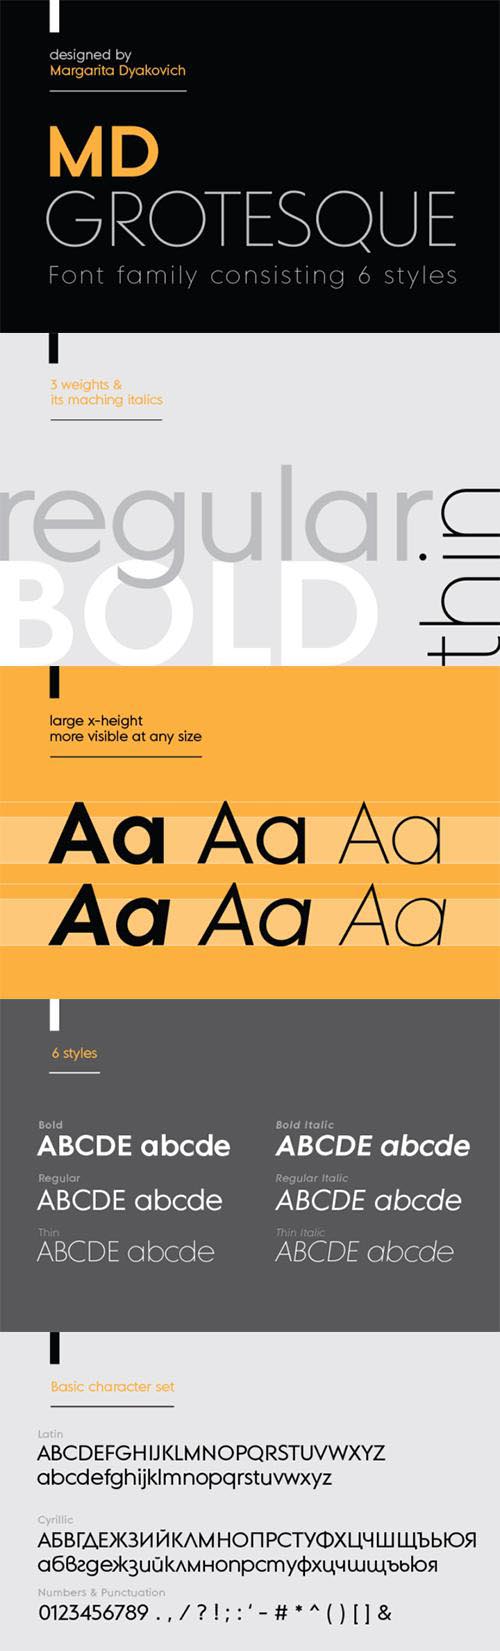 MD Grotesque font family